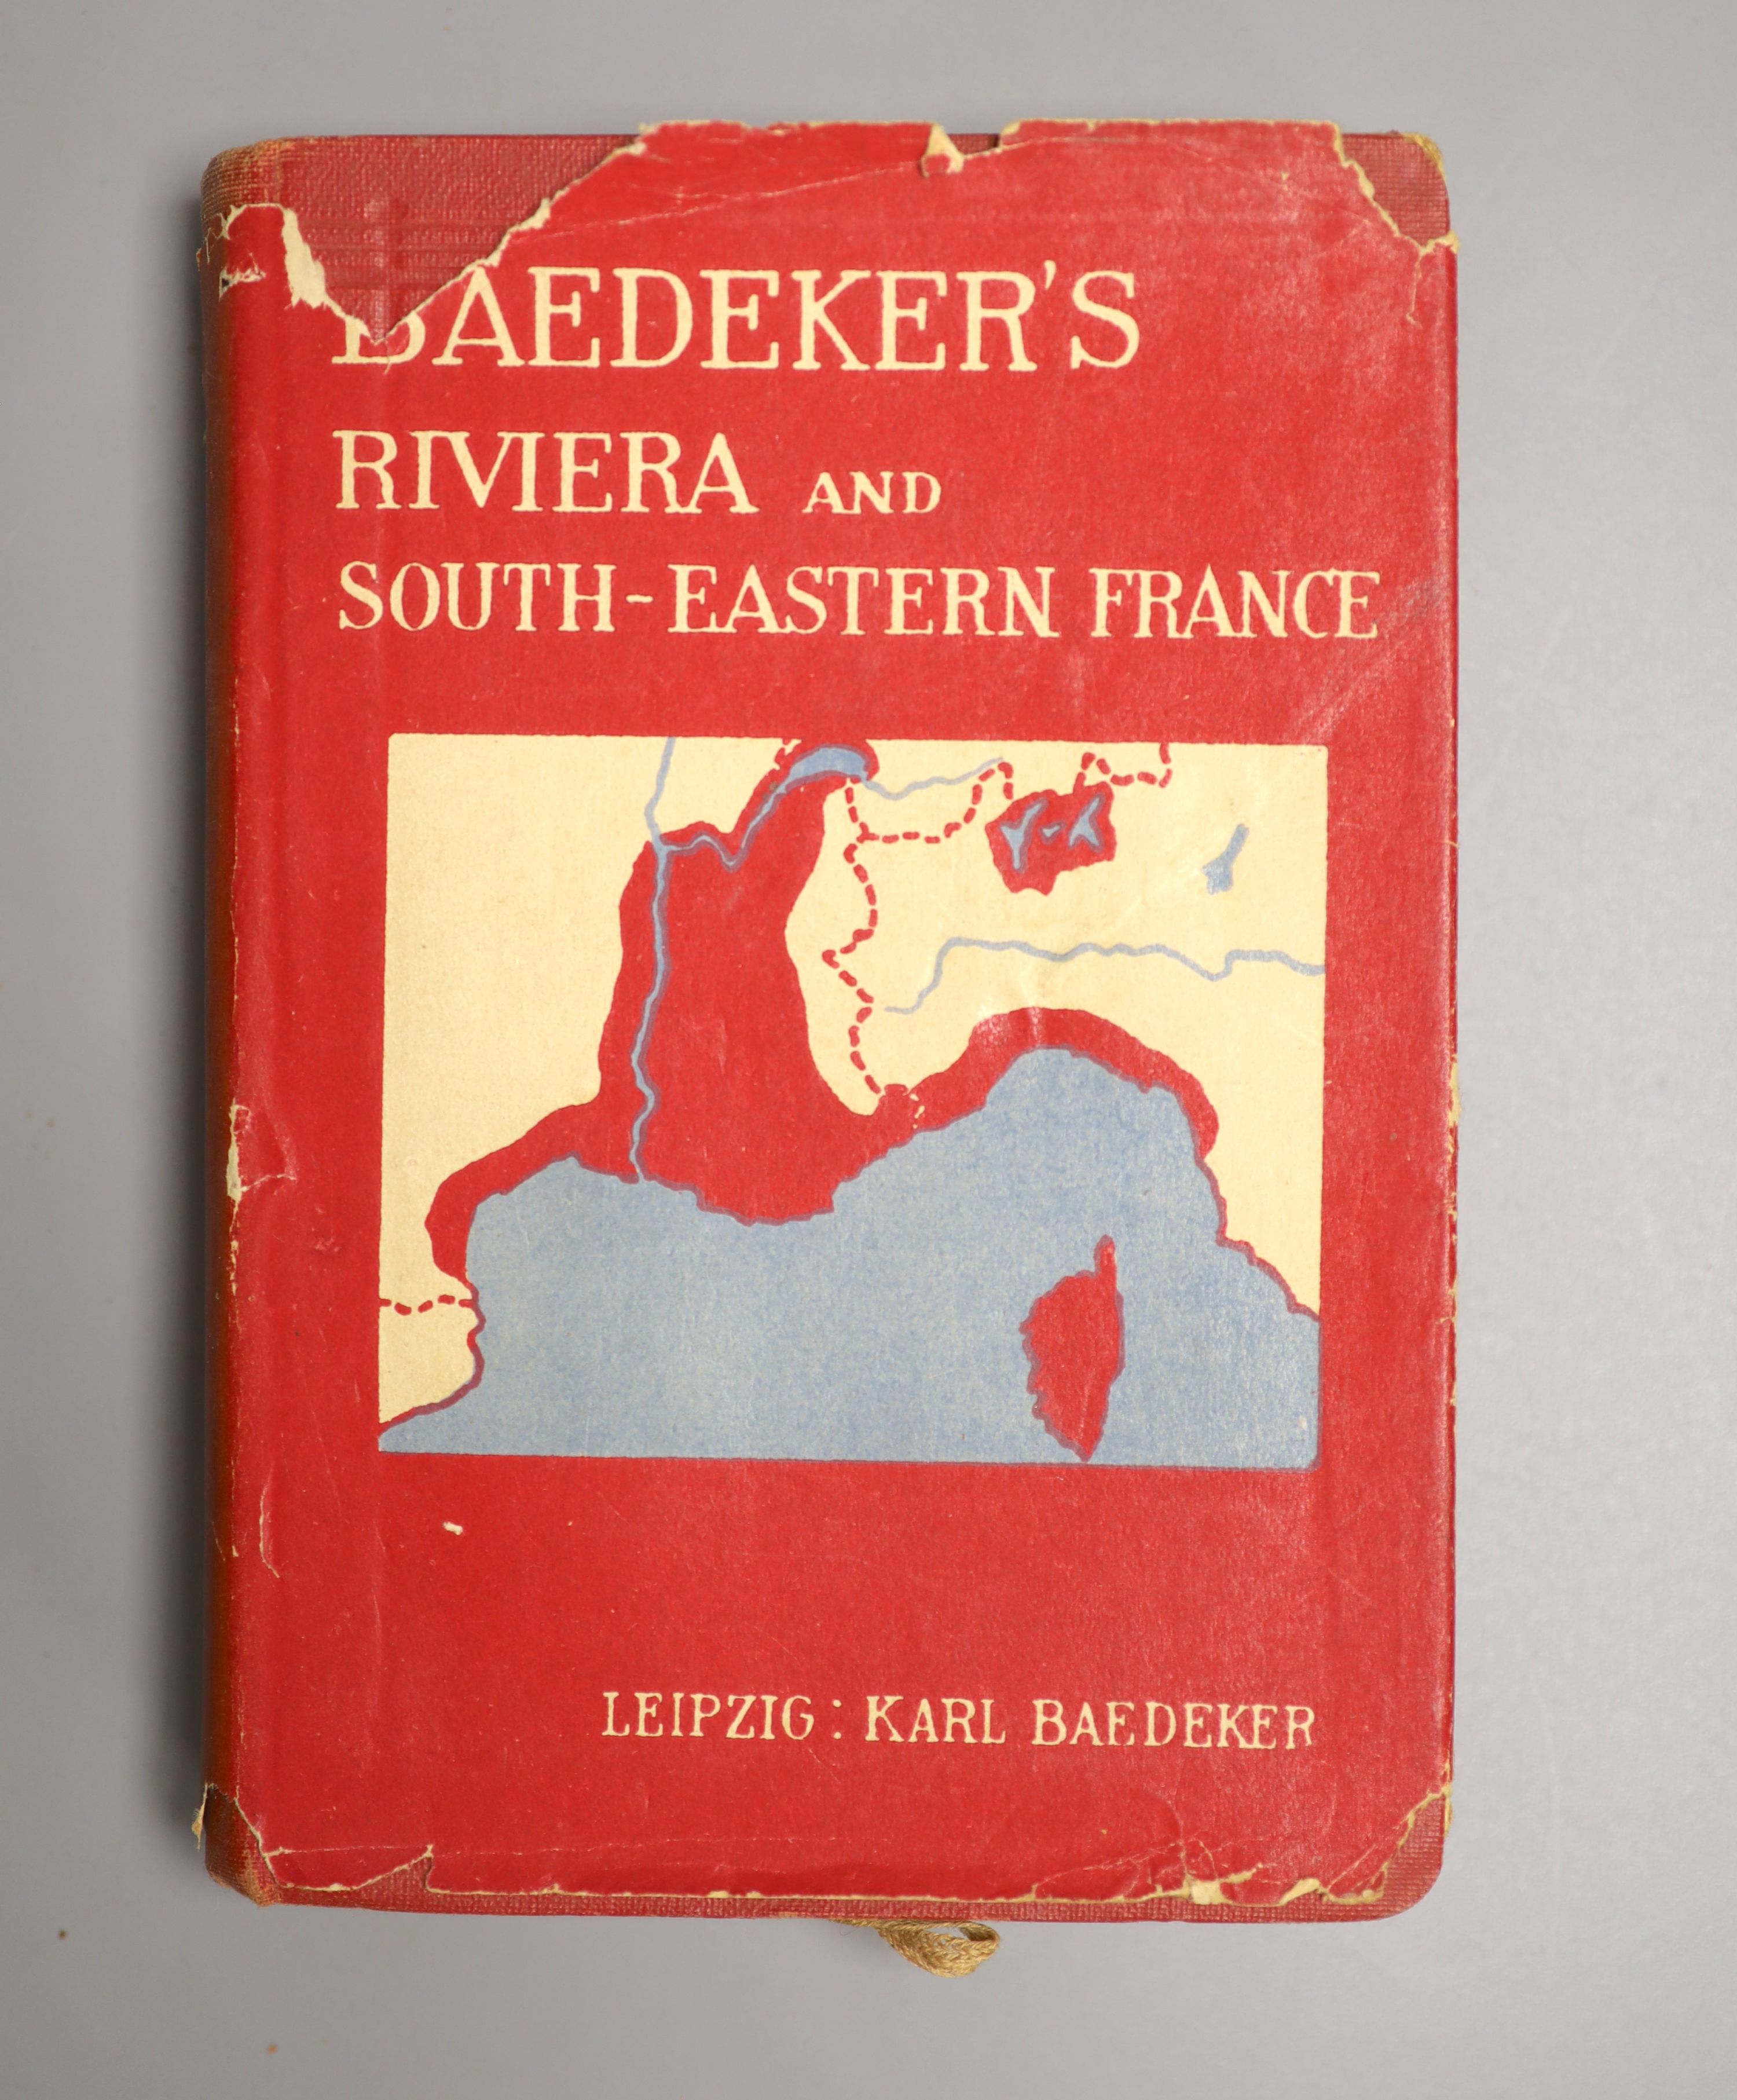 Baedeker, Karl - 21 guides, including Baedeker’s Riviera and South-Eastern France and Corsica, in d/j, torn and with loss, Leipzig, 1931